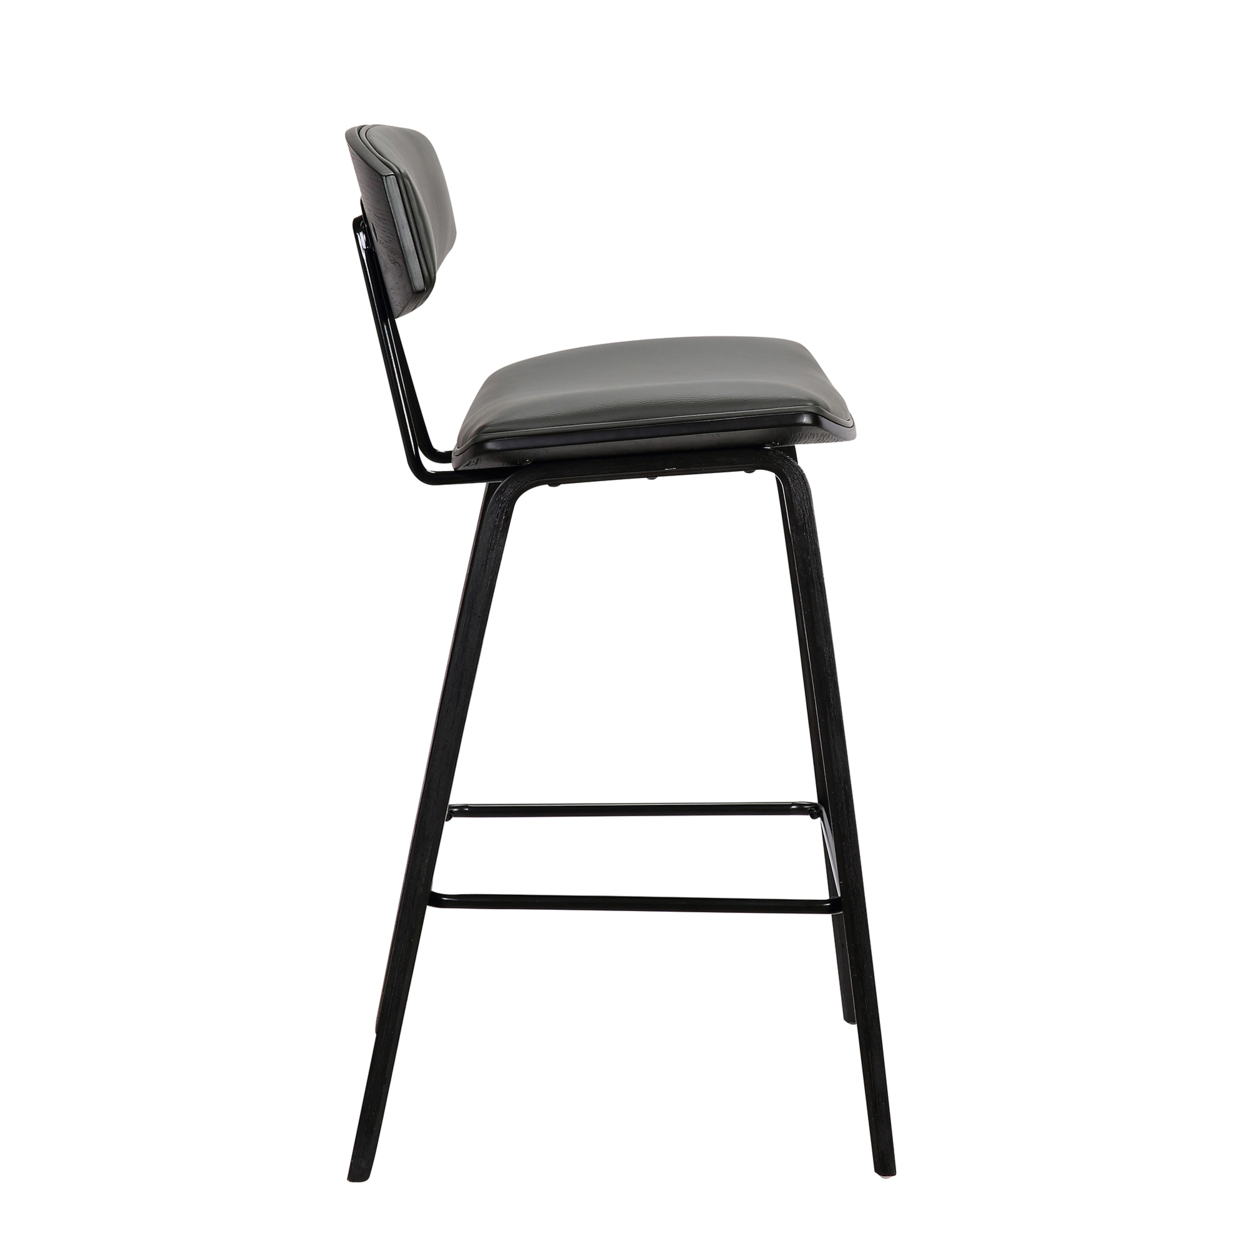 Counter Height Wooden Bar Stool With Curved Leatherette Seat,Black And Gray- Saltoro Sherpi